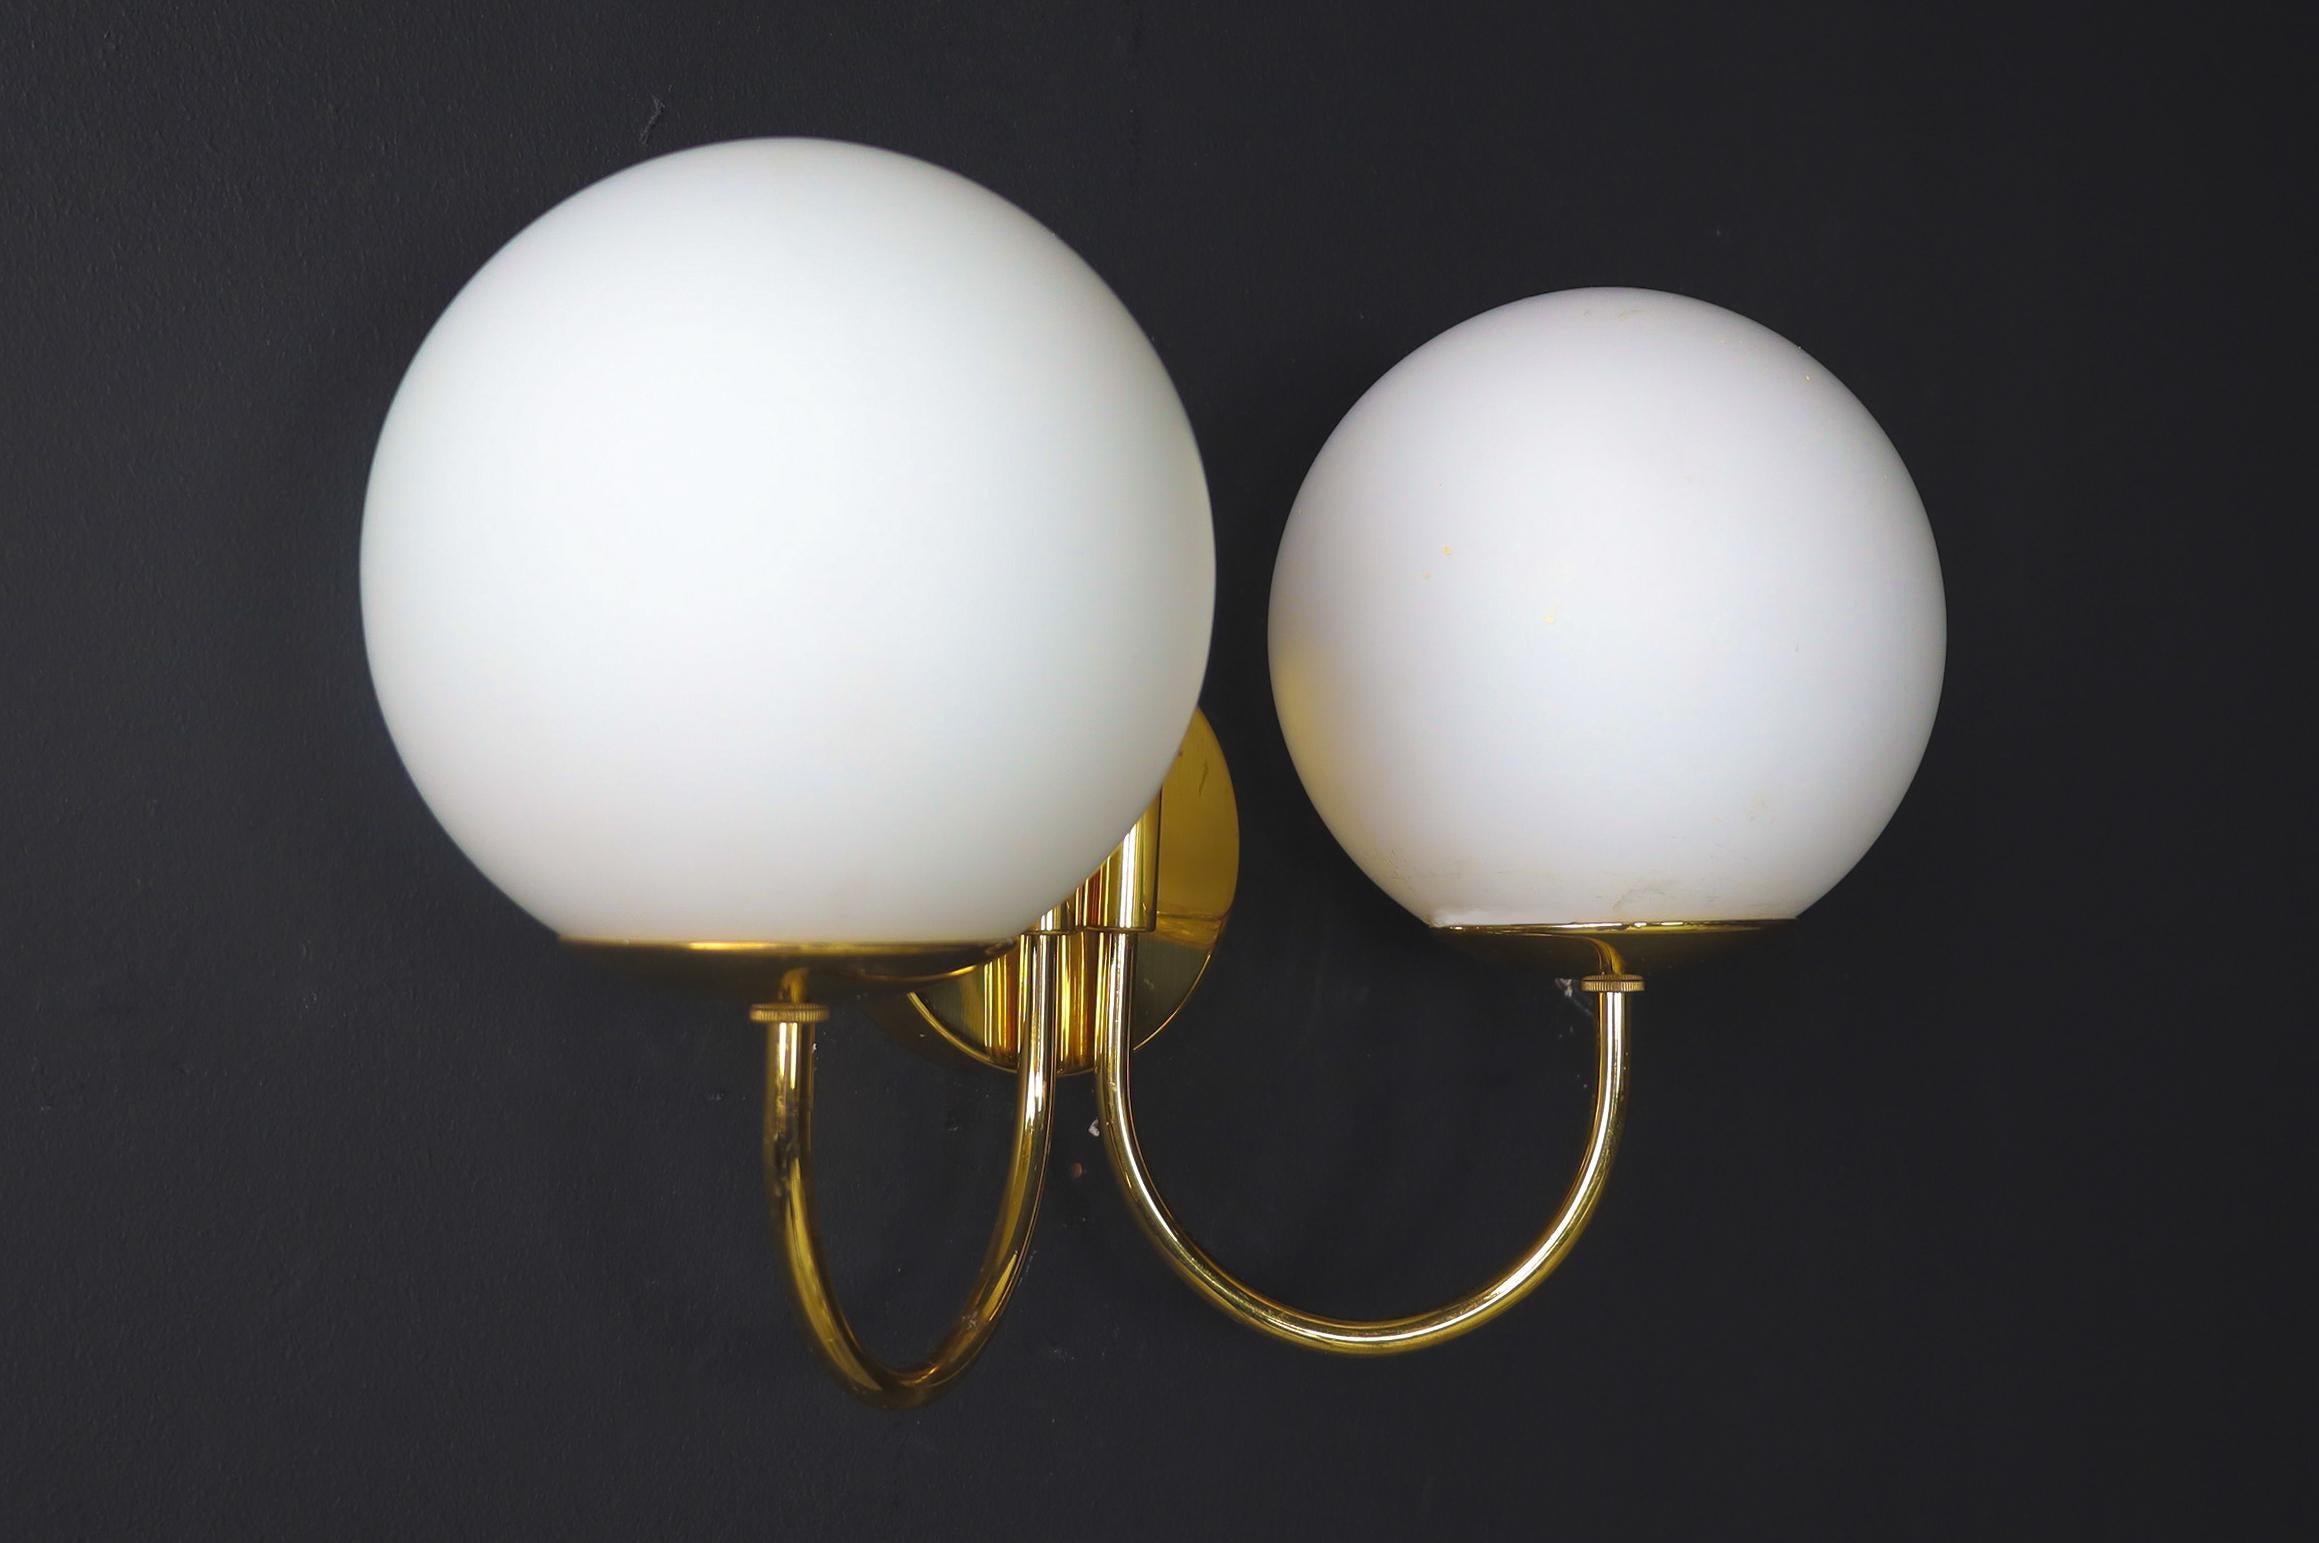 Elegant sconces with brass fixtures and opaline glass globes, Italy 1960s

A large set of wall lights/sconces with a brass fixture was produced and designed in Italy in the 1960s. The pleasant light it spreads is very atmospheric. Completed with